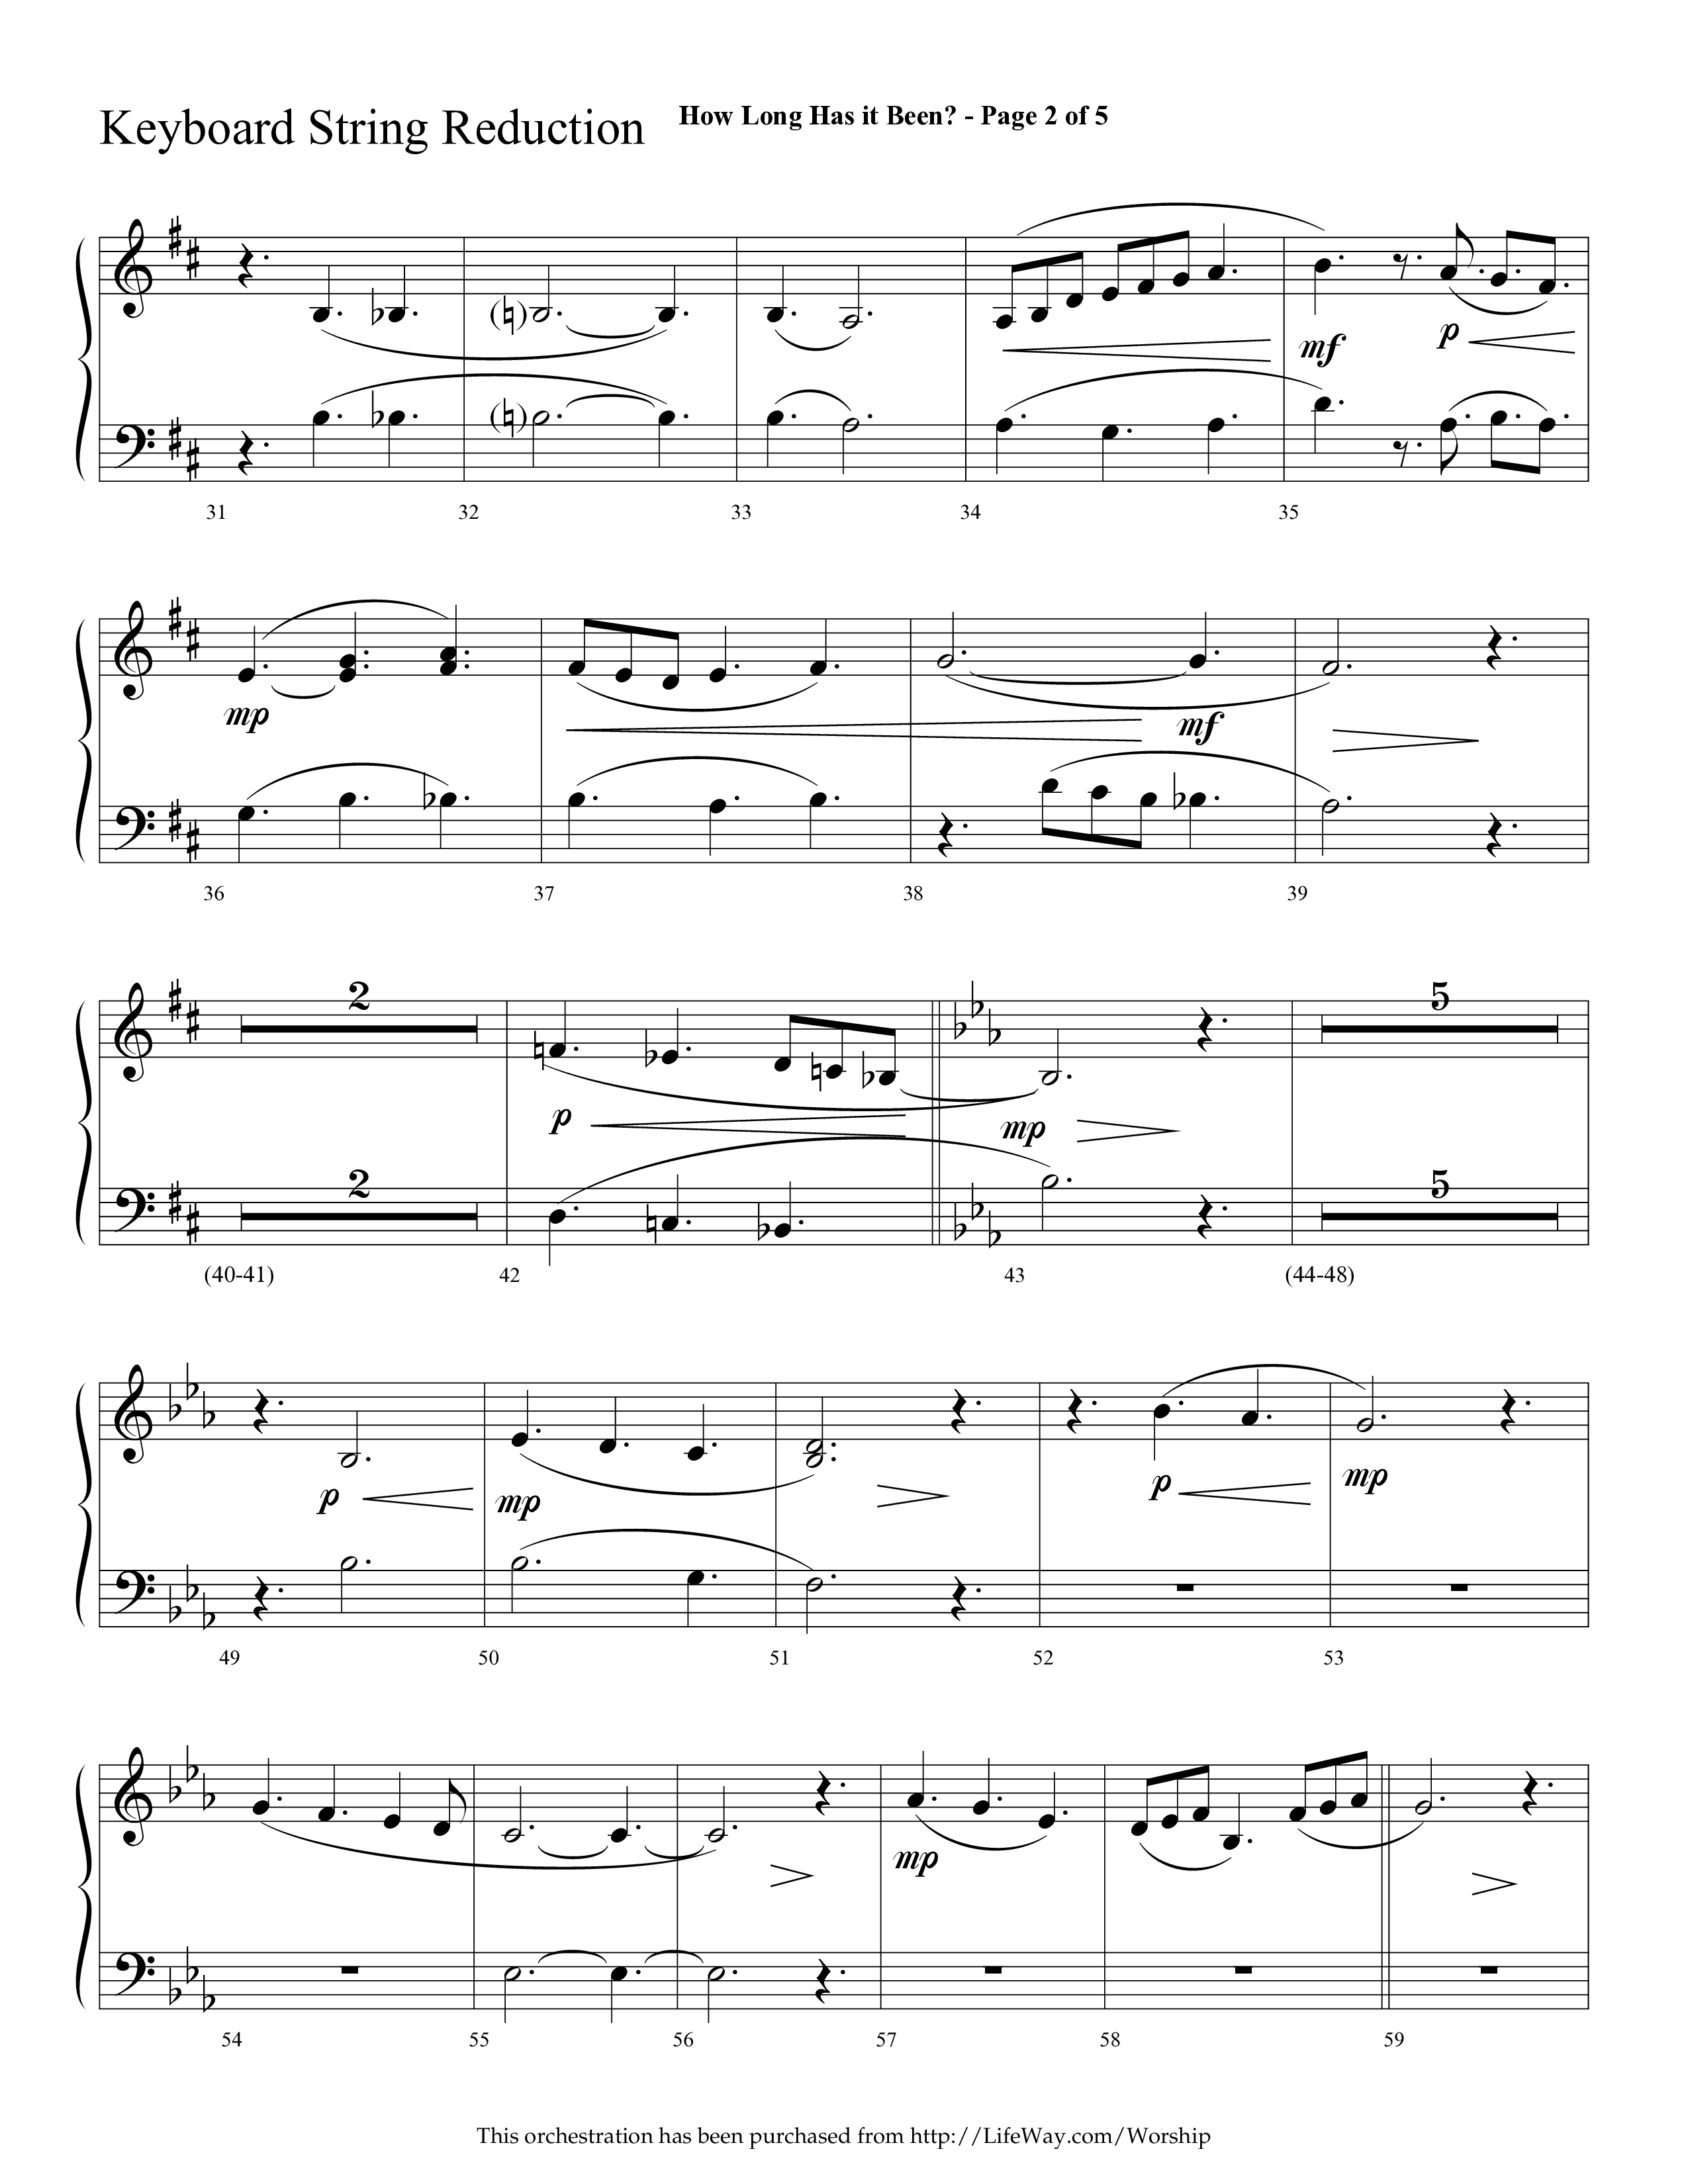 How Long Has It Been (with Pray On) (Choral Anthem SATB) String Reduction (Lifeway Choral / Arr. Cliff Duren)